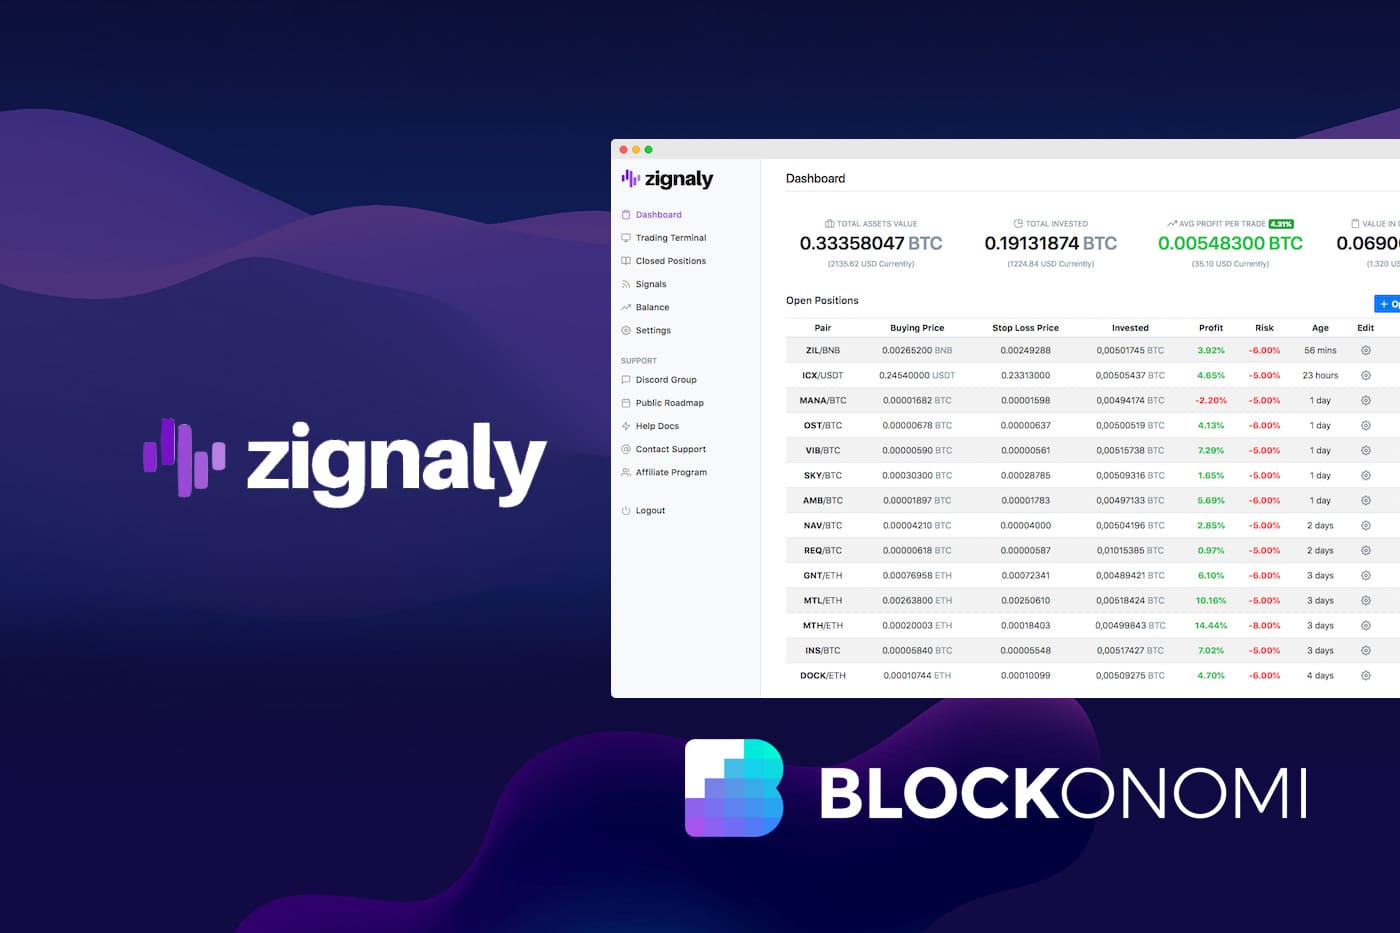 Zignaly Review 2021: Is it Legit, or a Scam?